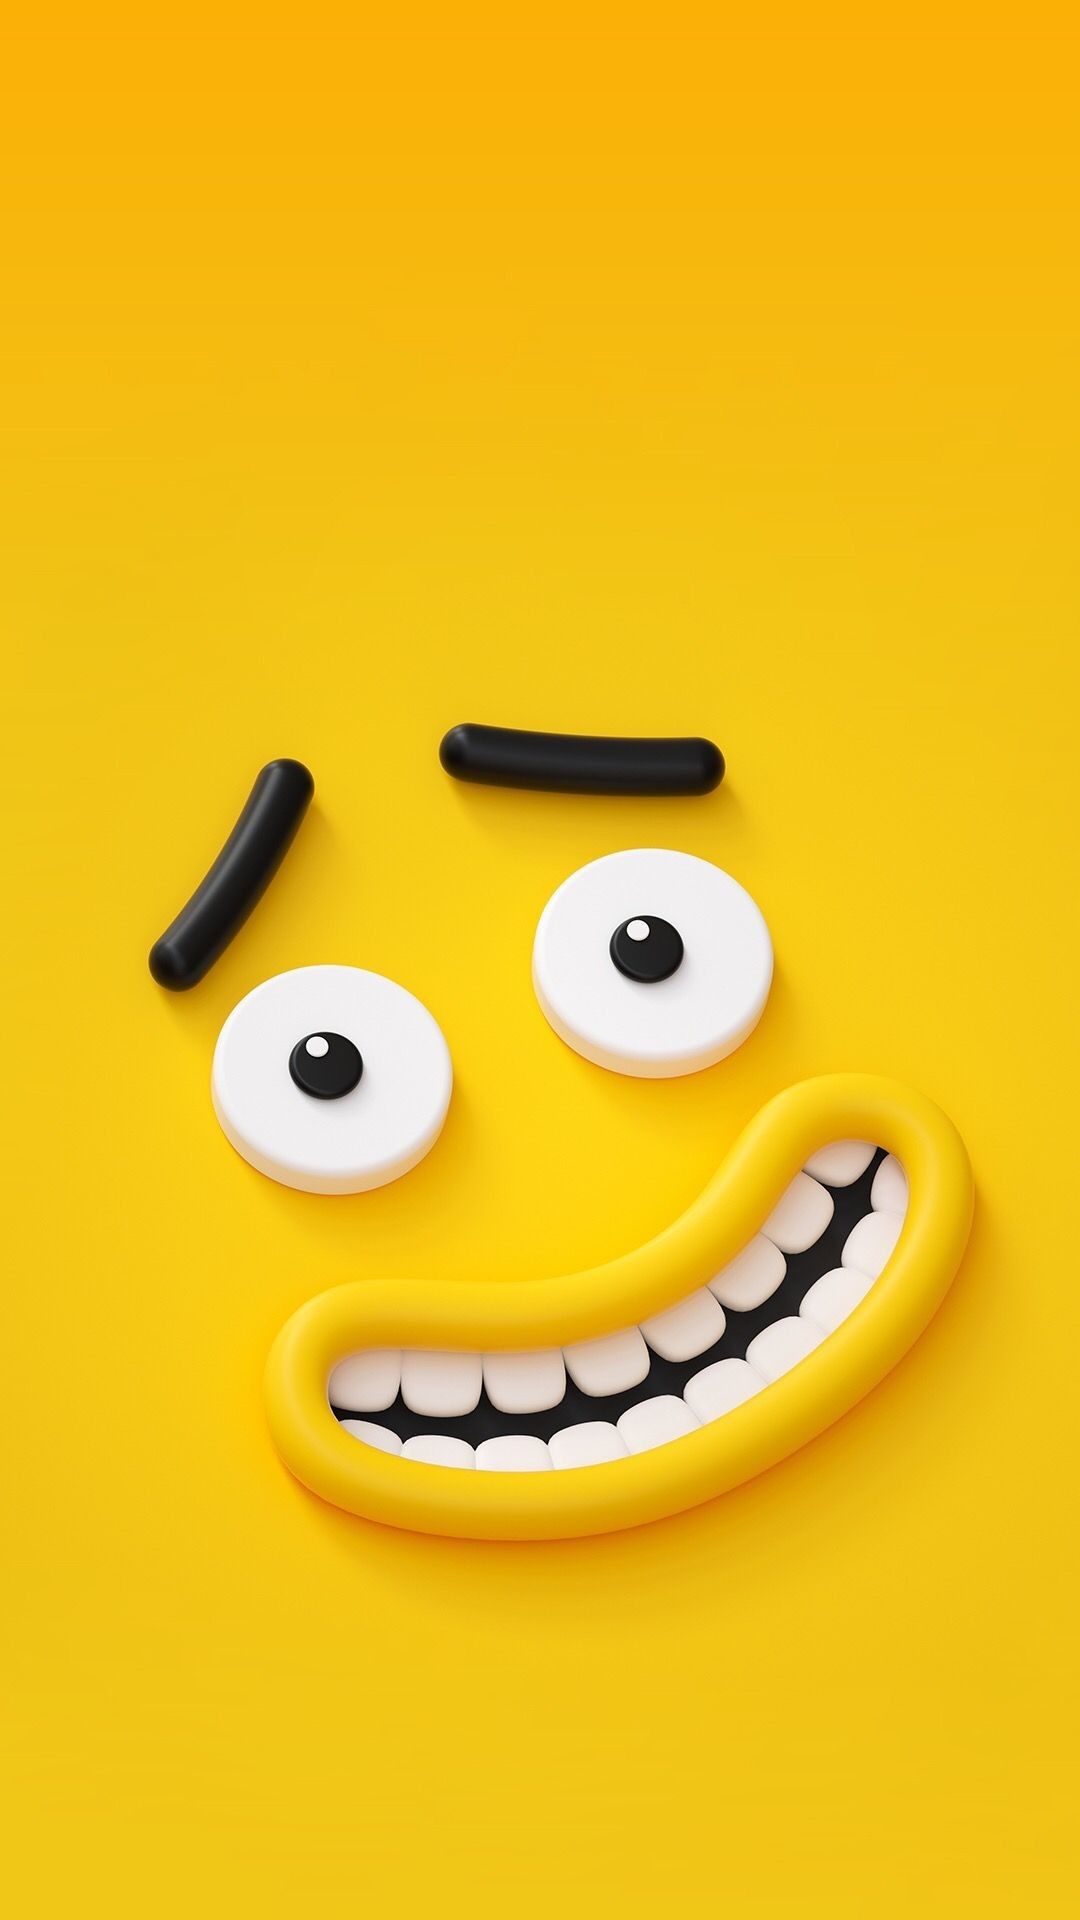 HD wallpaper: Smiley Happy, yellow emoji, 3d and abstract | Wallpaper Flare